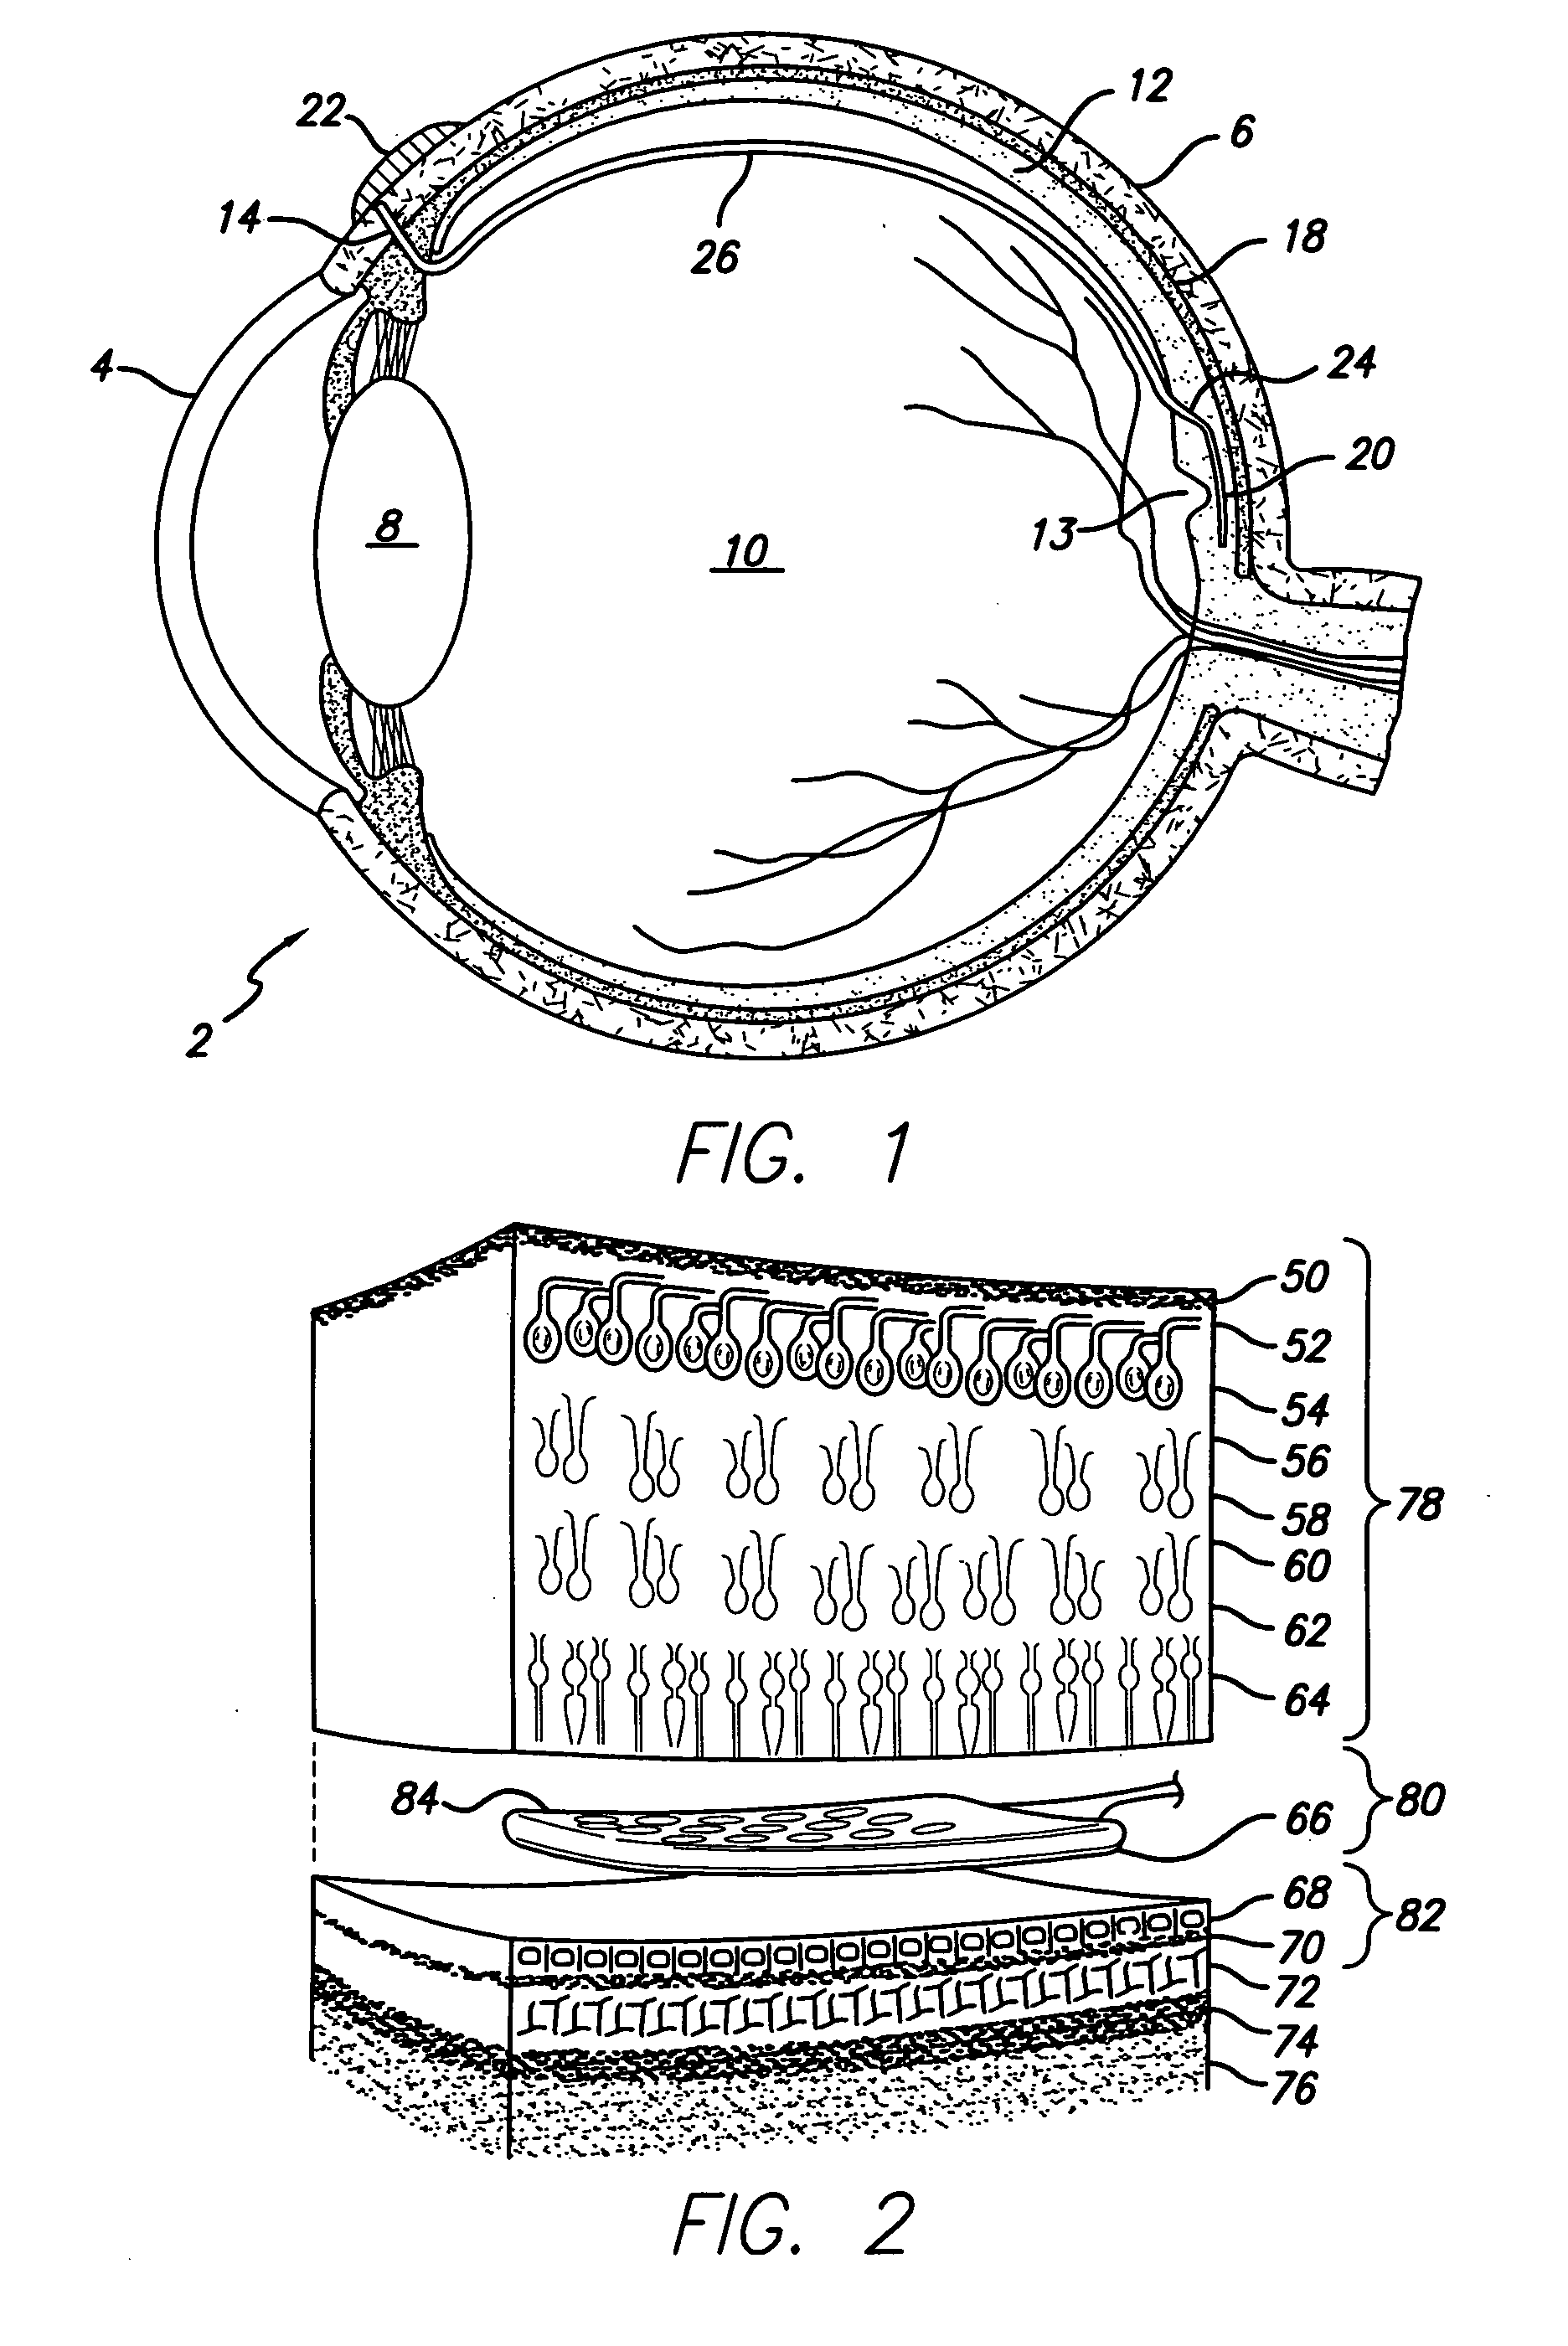 Transretinal implant and method of manufacture